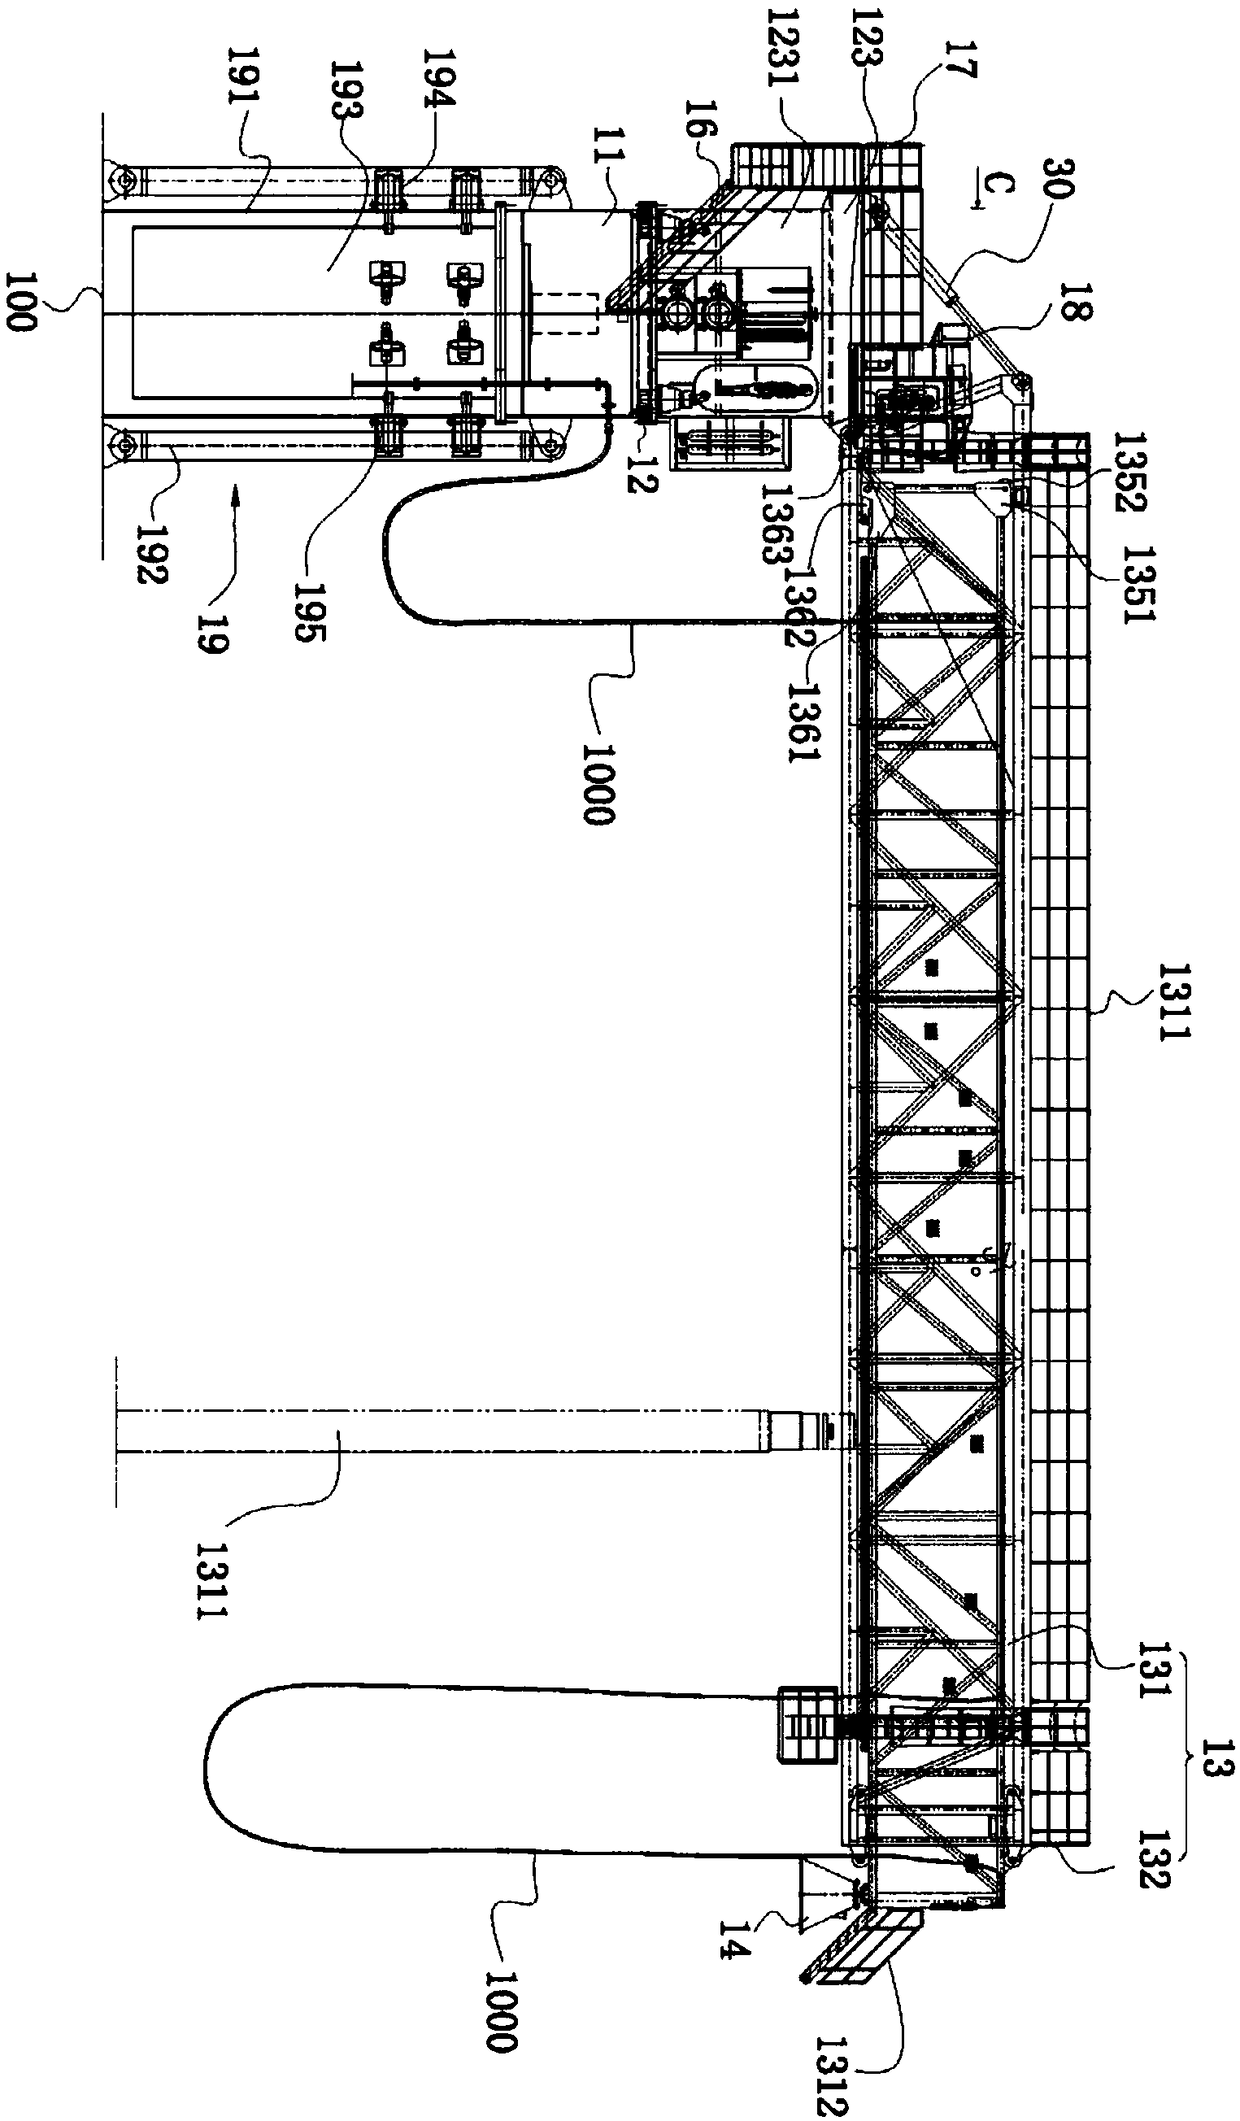 Working method for retractable ship-boarding trestle bridge with function of position compensation